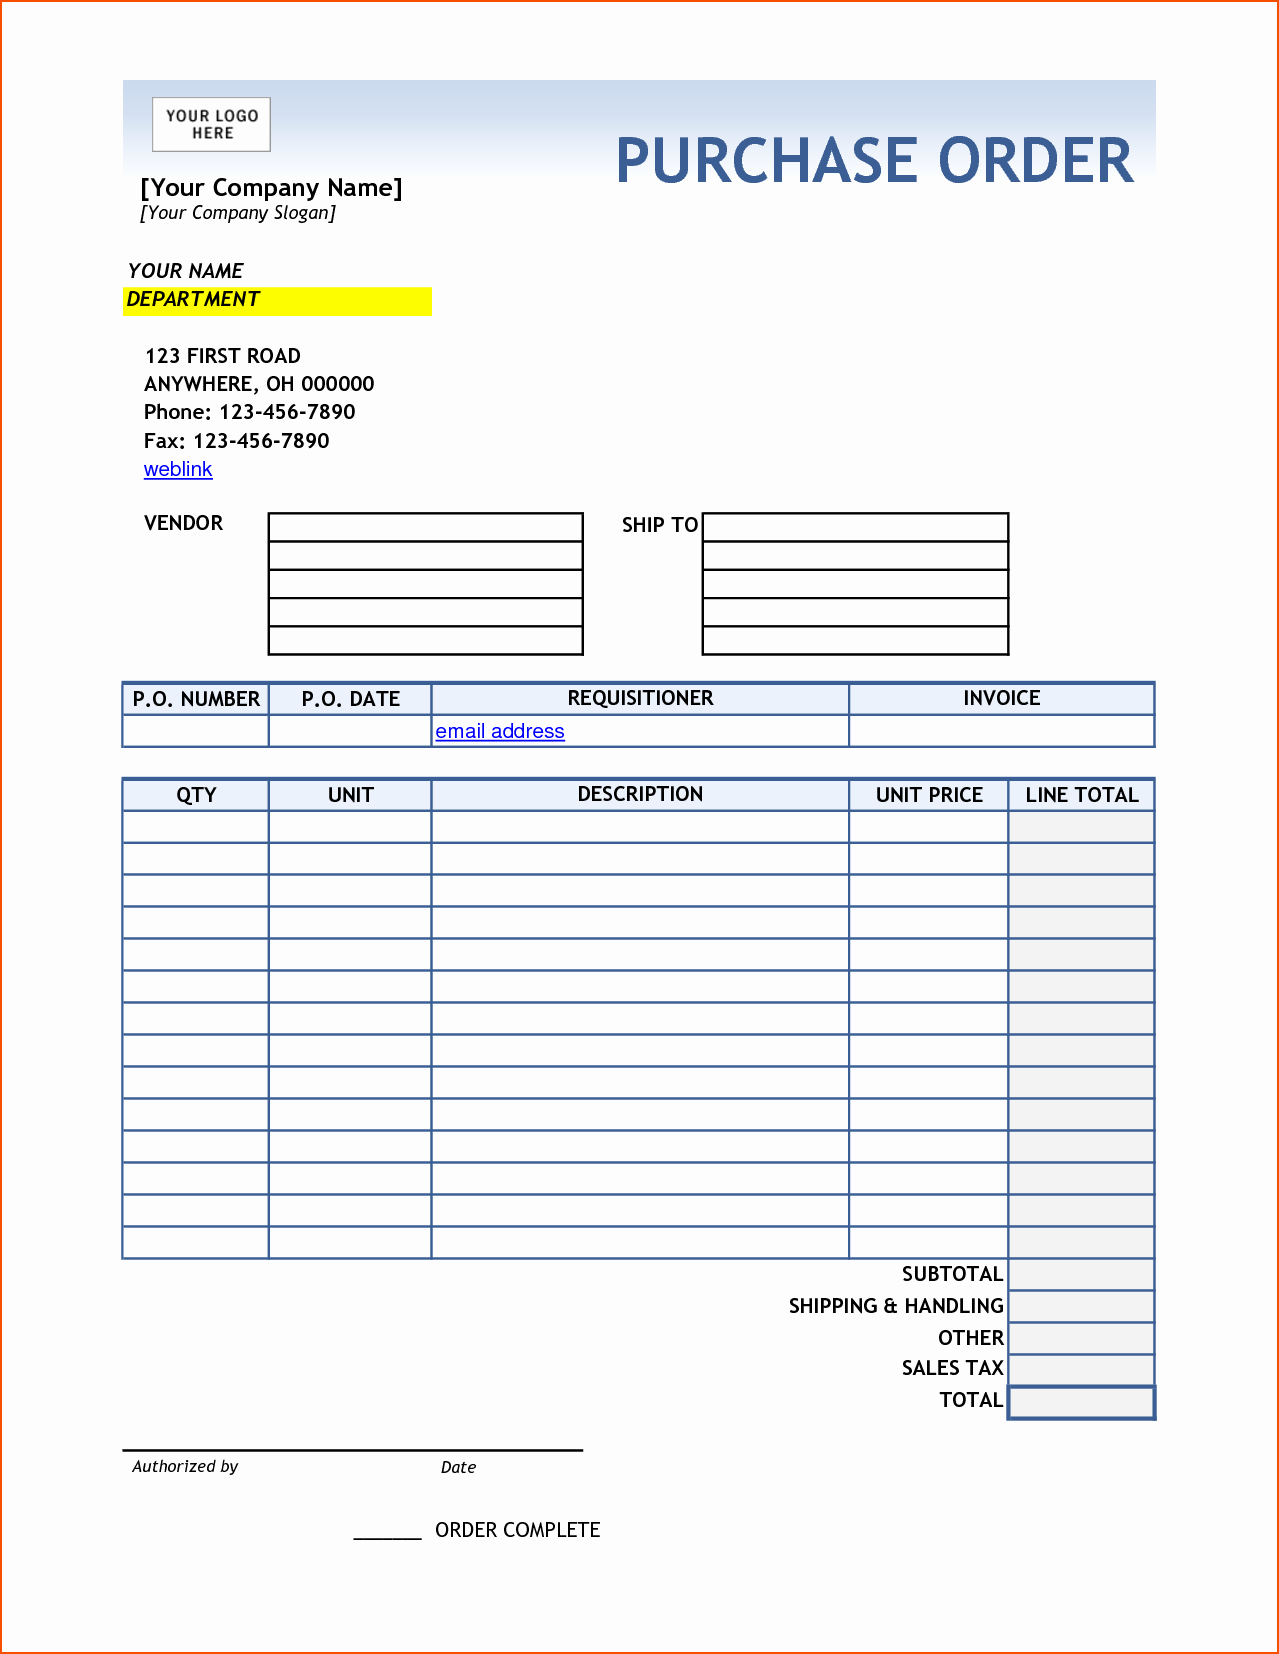 Purchase order Template Word Inspirational Purchase order Template Pdf format In Word Daily Roabox